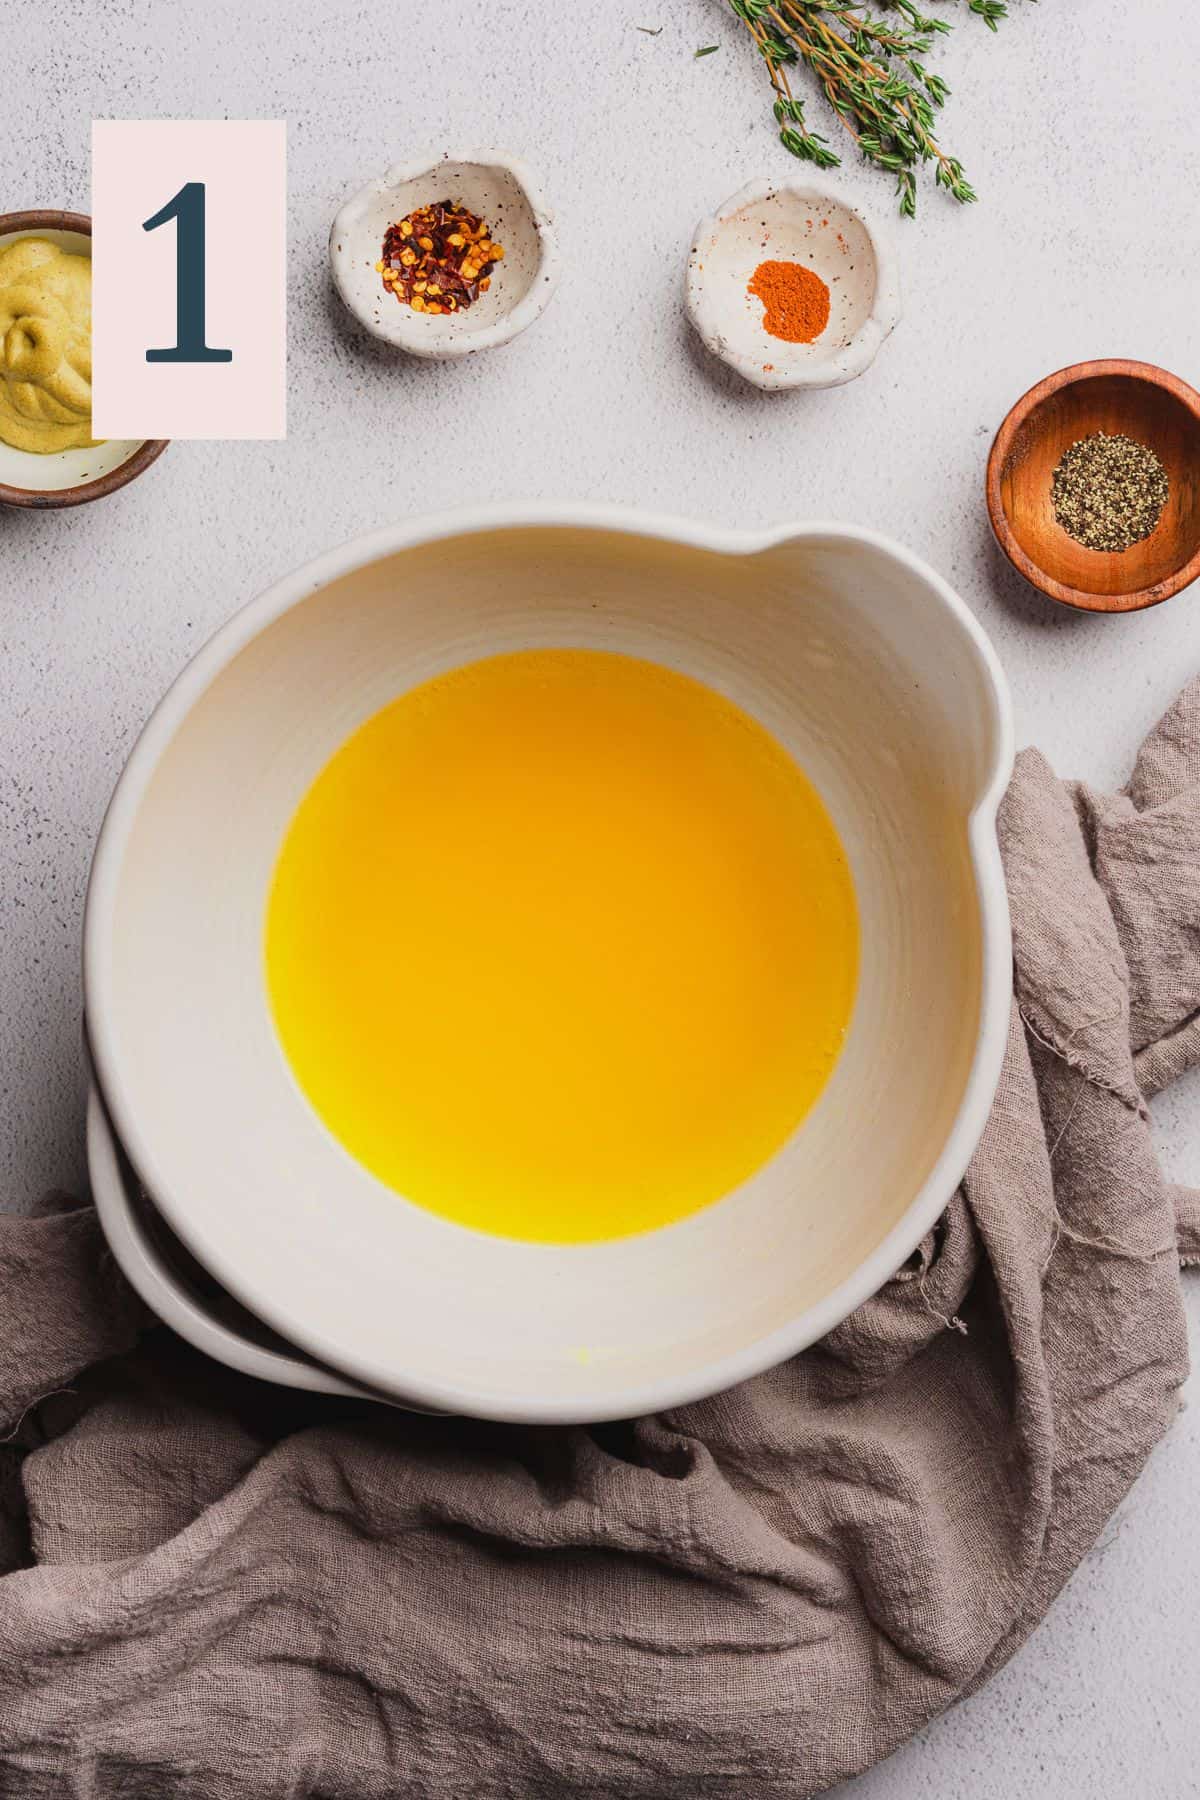 melted butter in a ceramic white mixing bowl surrounded by seasonings.